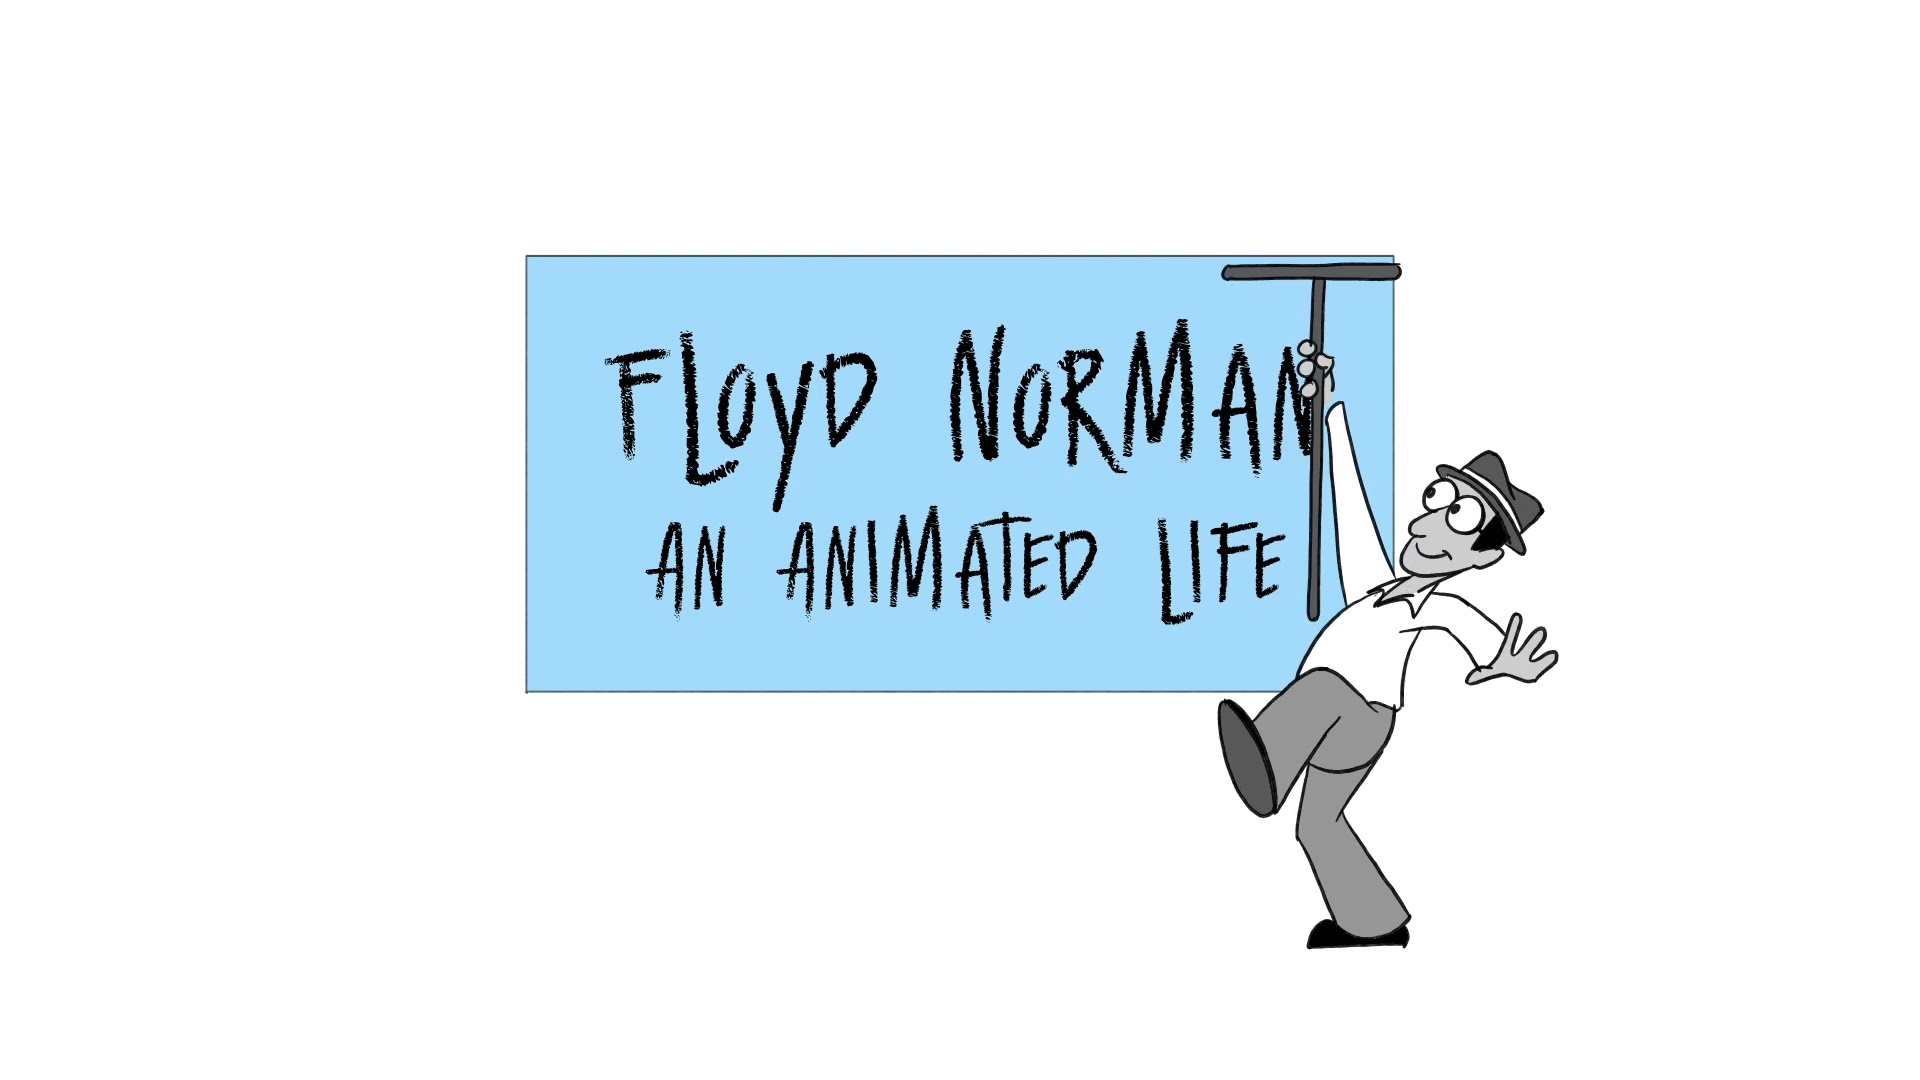 FLOYD NORMAN: AN ANIMATED LIFE - Behind The Lens Online